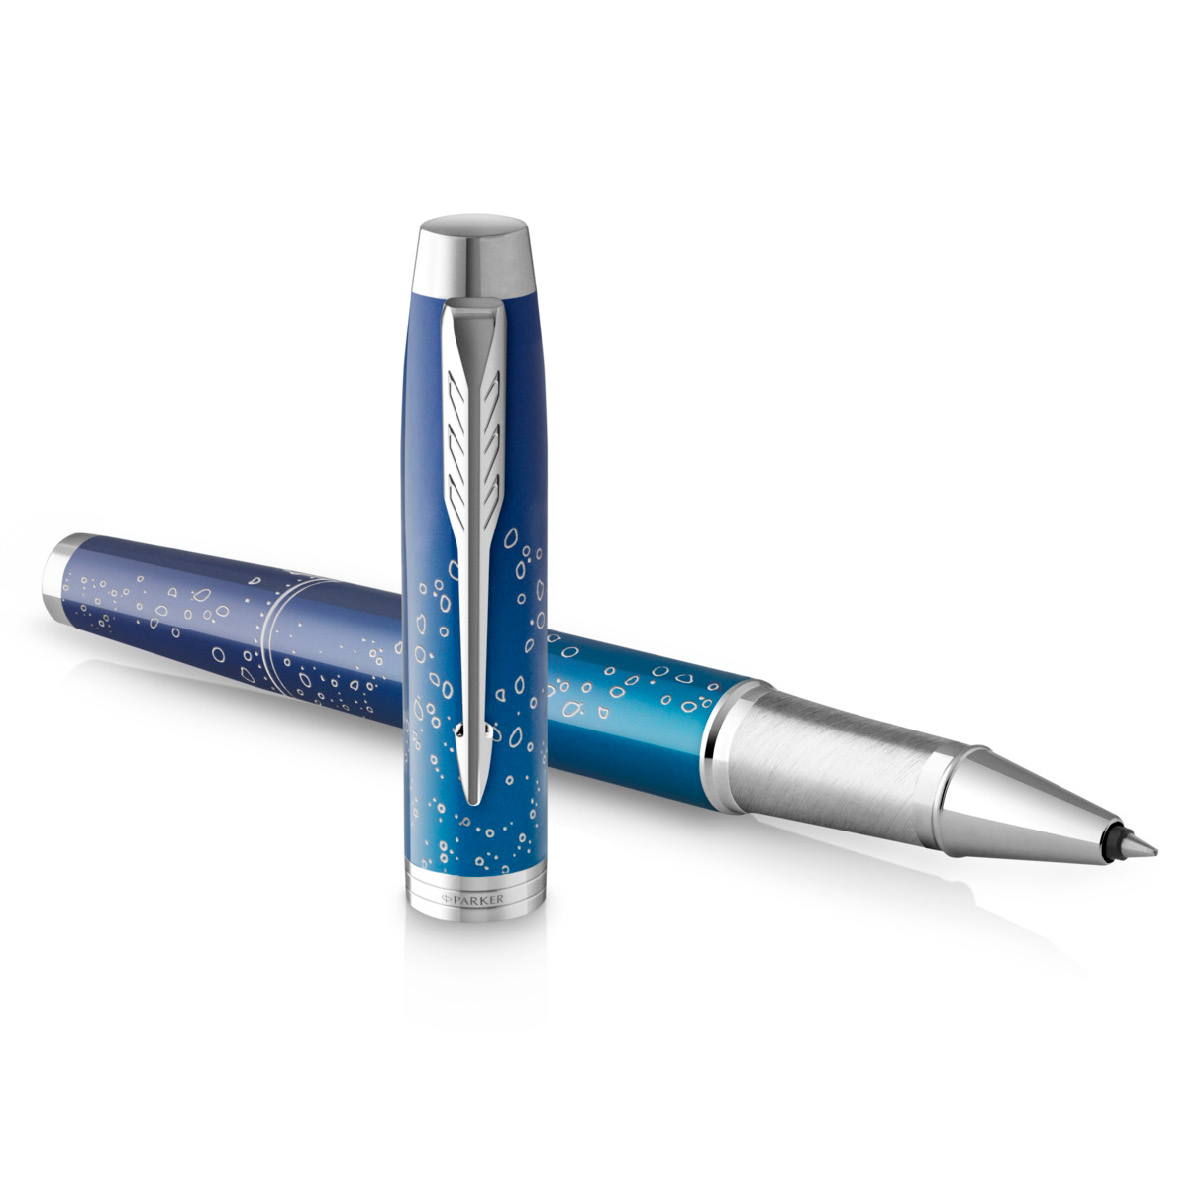 IM Submerge CT Rollerball in the group Pens / Fine Writing / Rollerball Pens at Pen Store (112671)